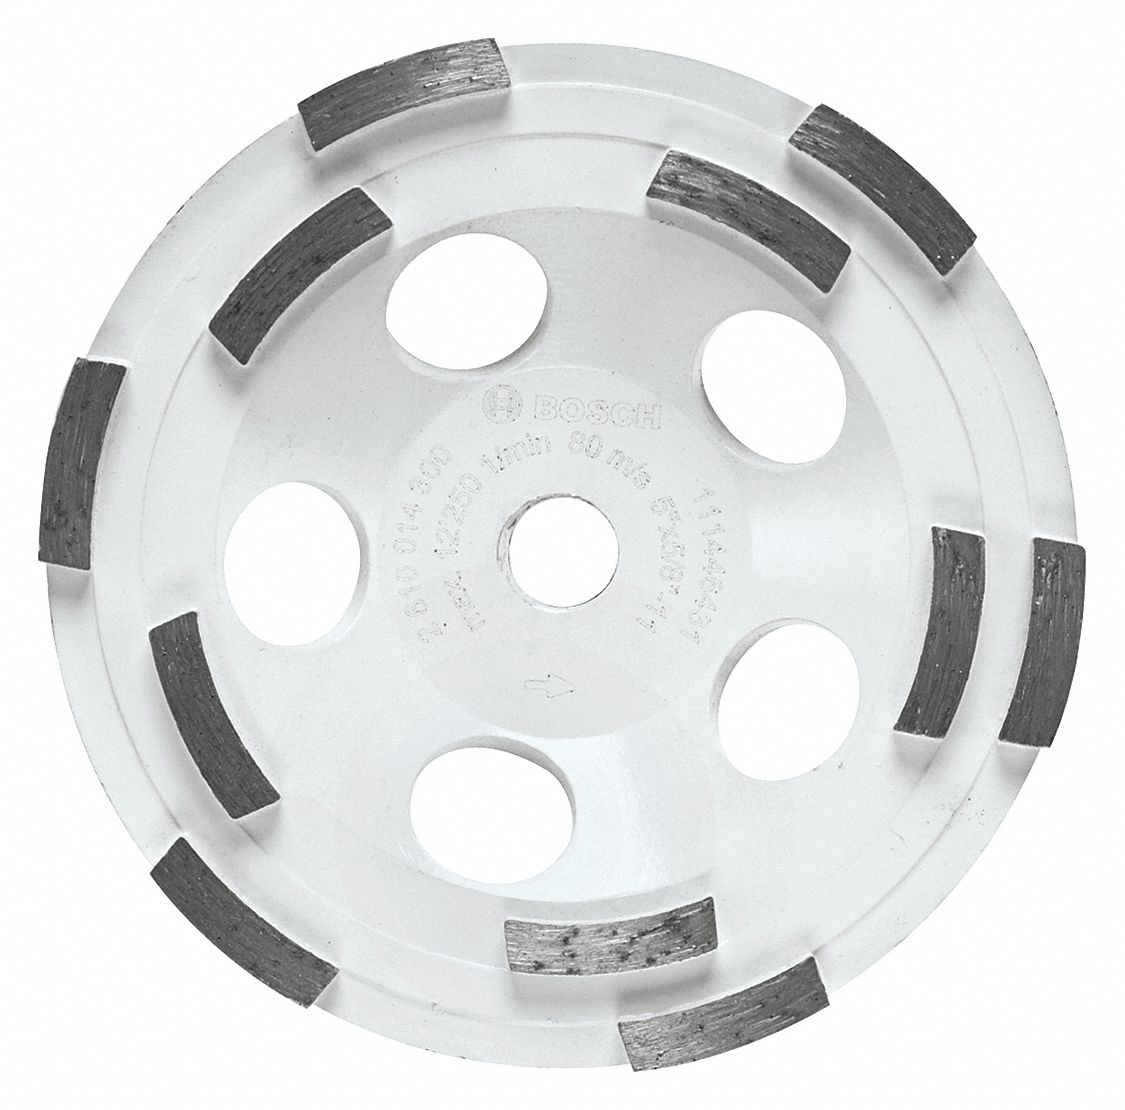 44M790 - 5InDoubleRowDiamondCupWheel General - Only Shipped in Quantities of 3